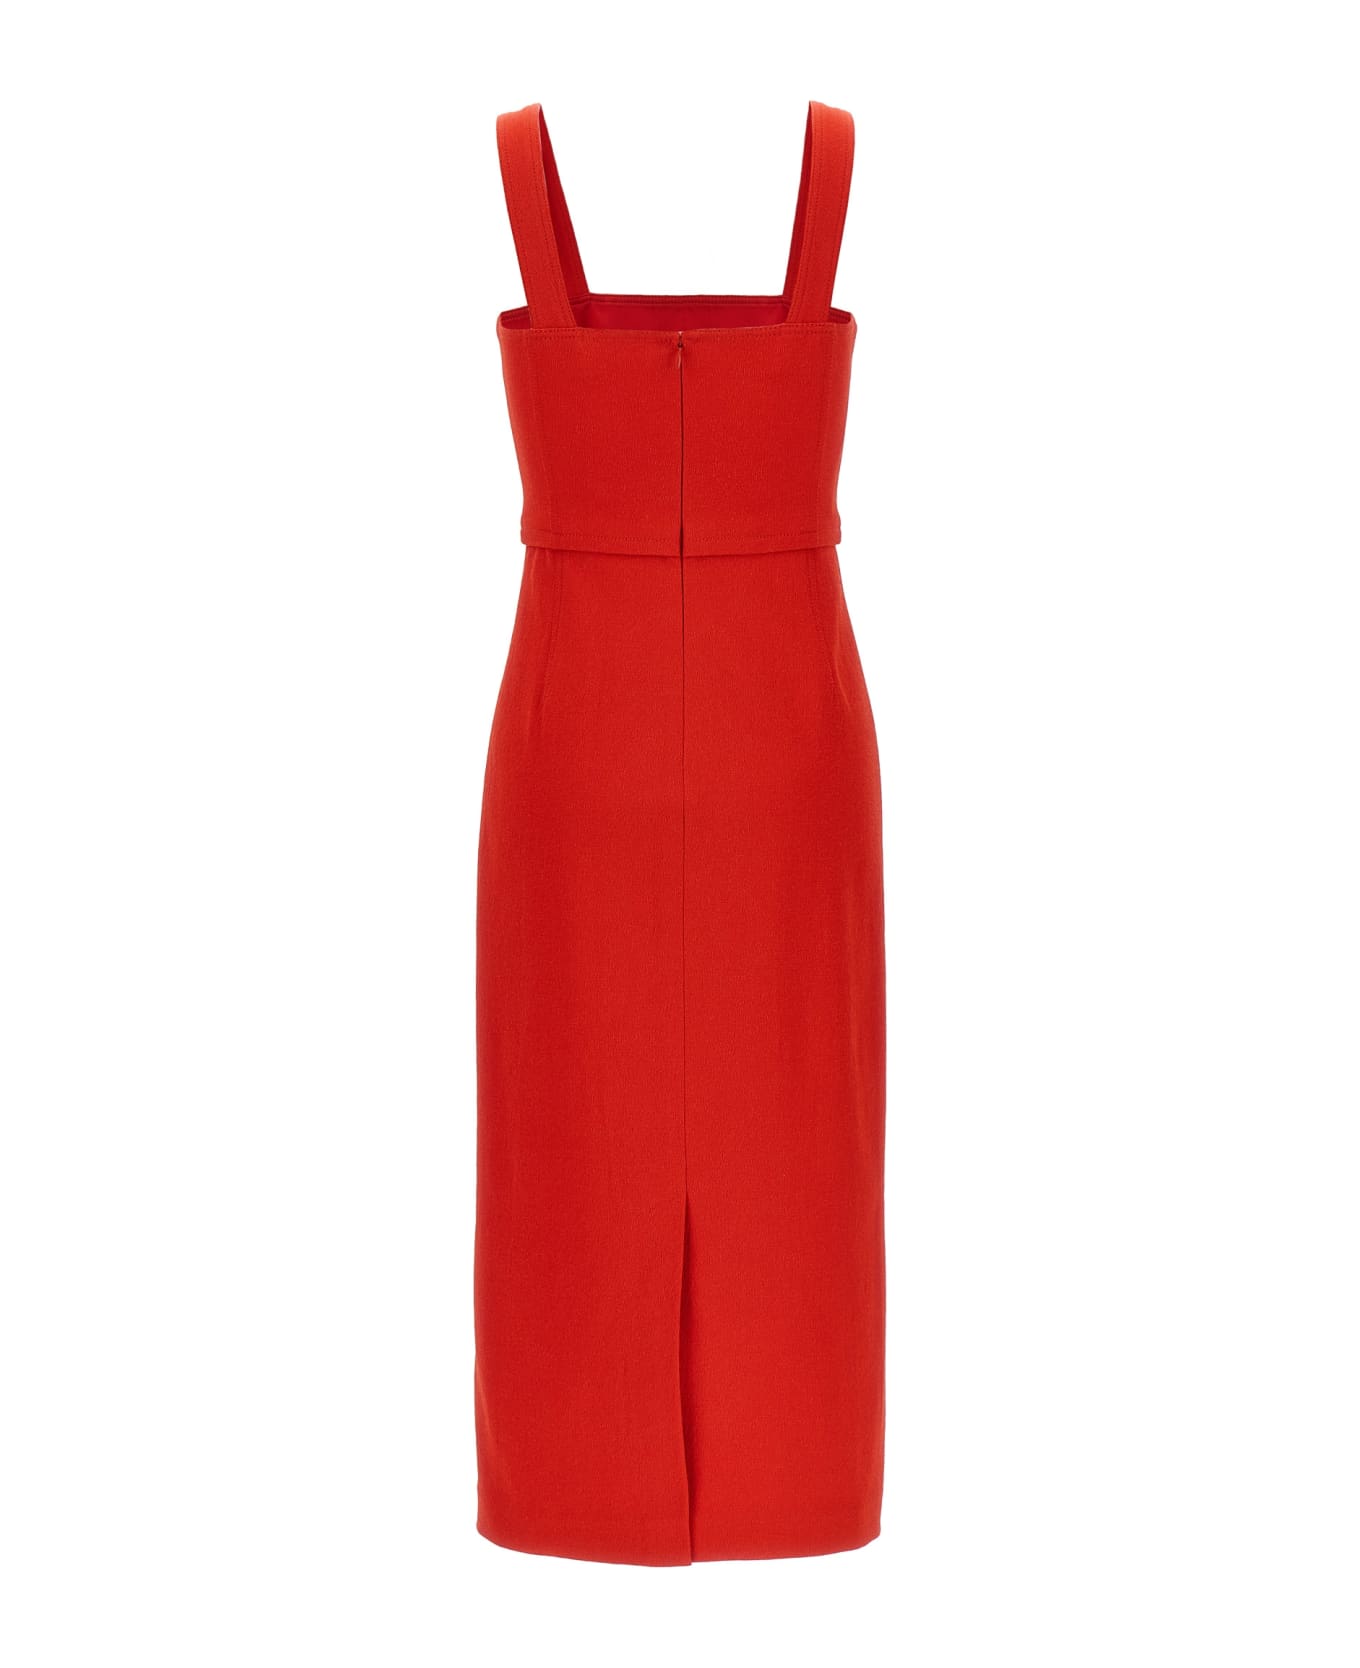 Tory Burch Faille Stretch Dress - Red ワンピース＆ドレス